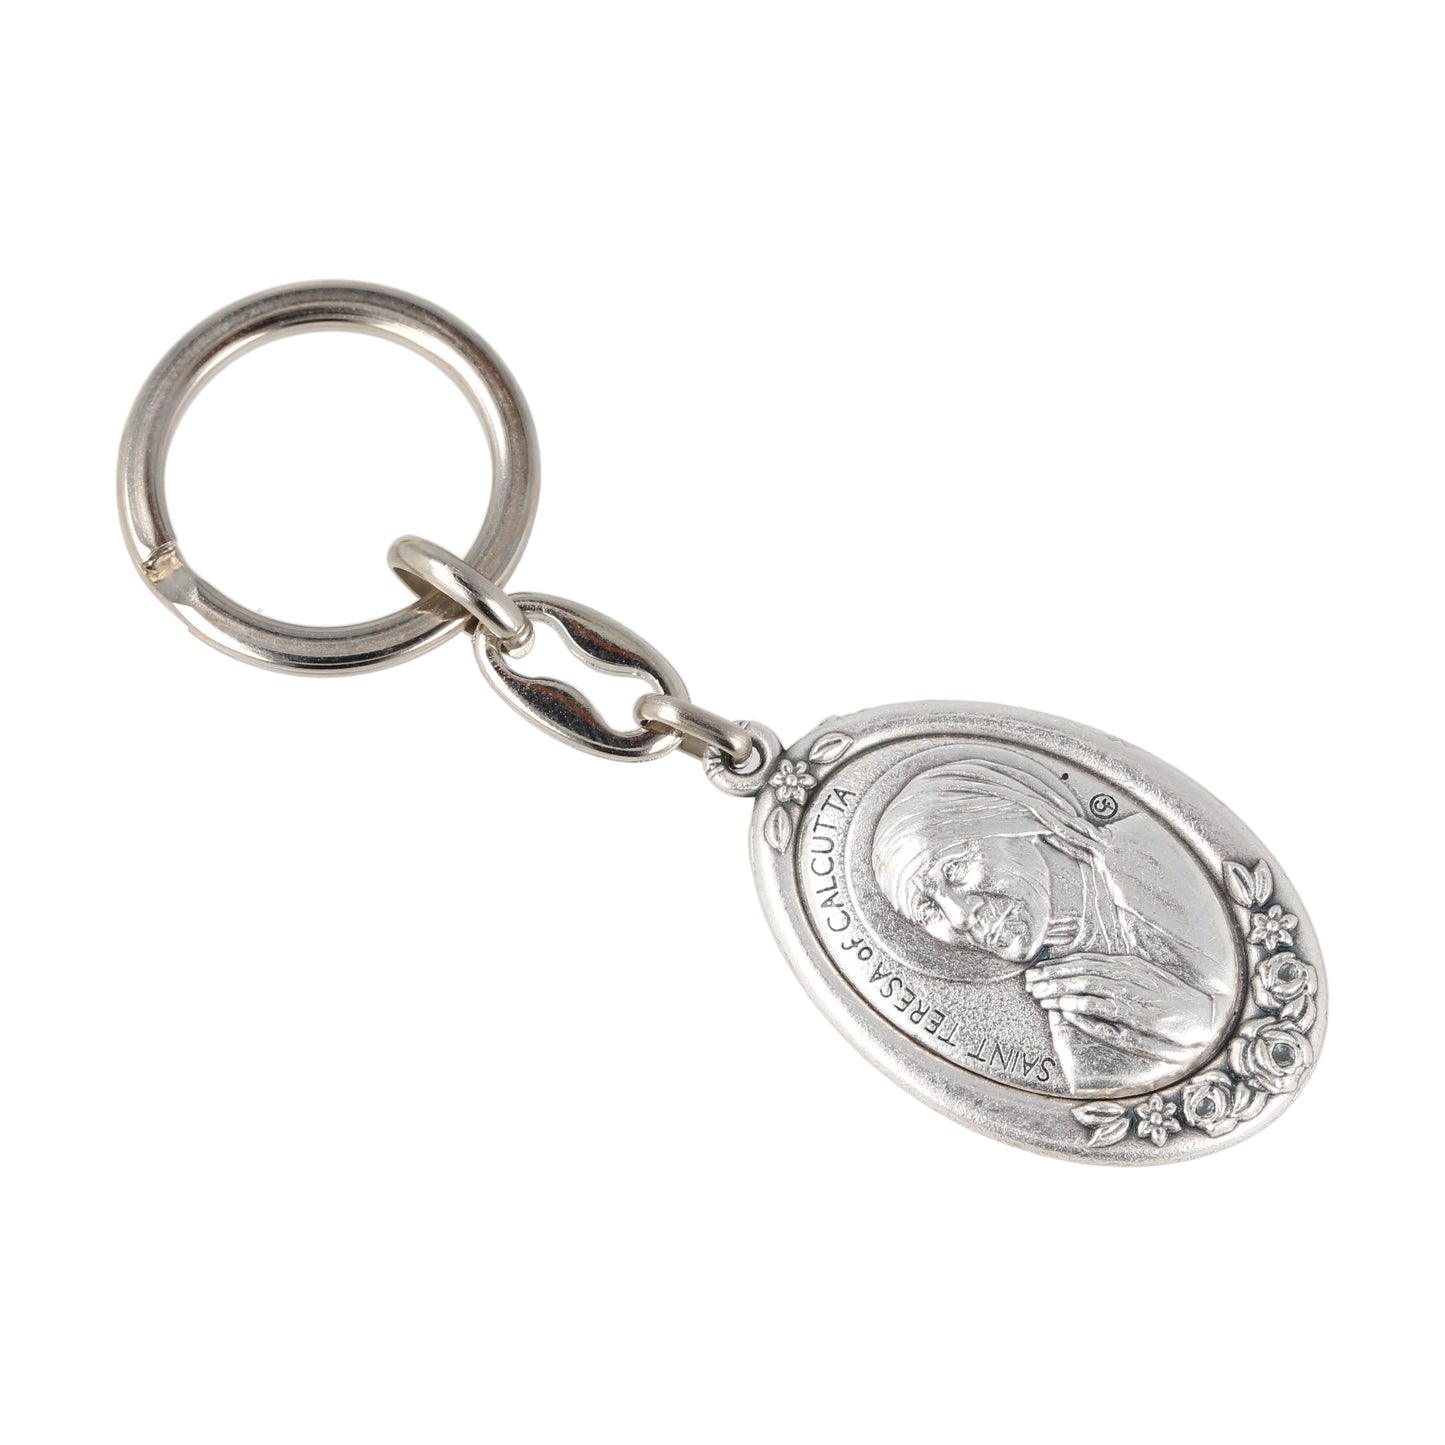 Keychain Mother Teresa of Calcutta Silver Oval With Flowers. Souvenirs from Italy